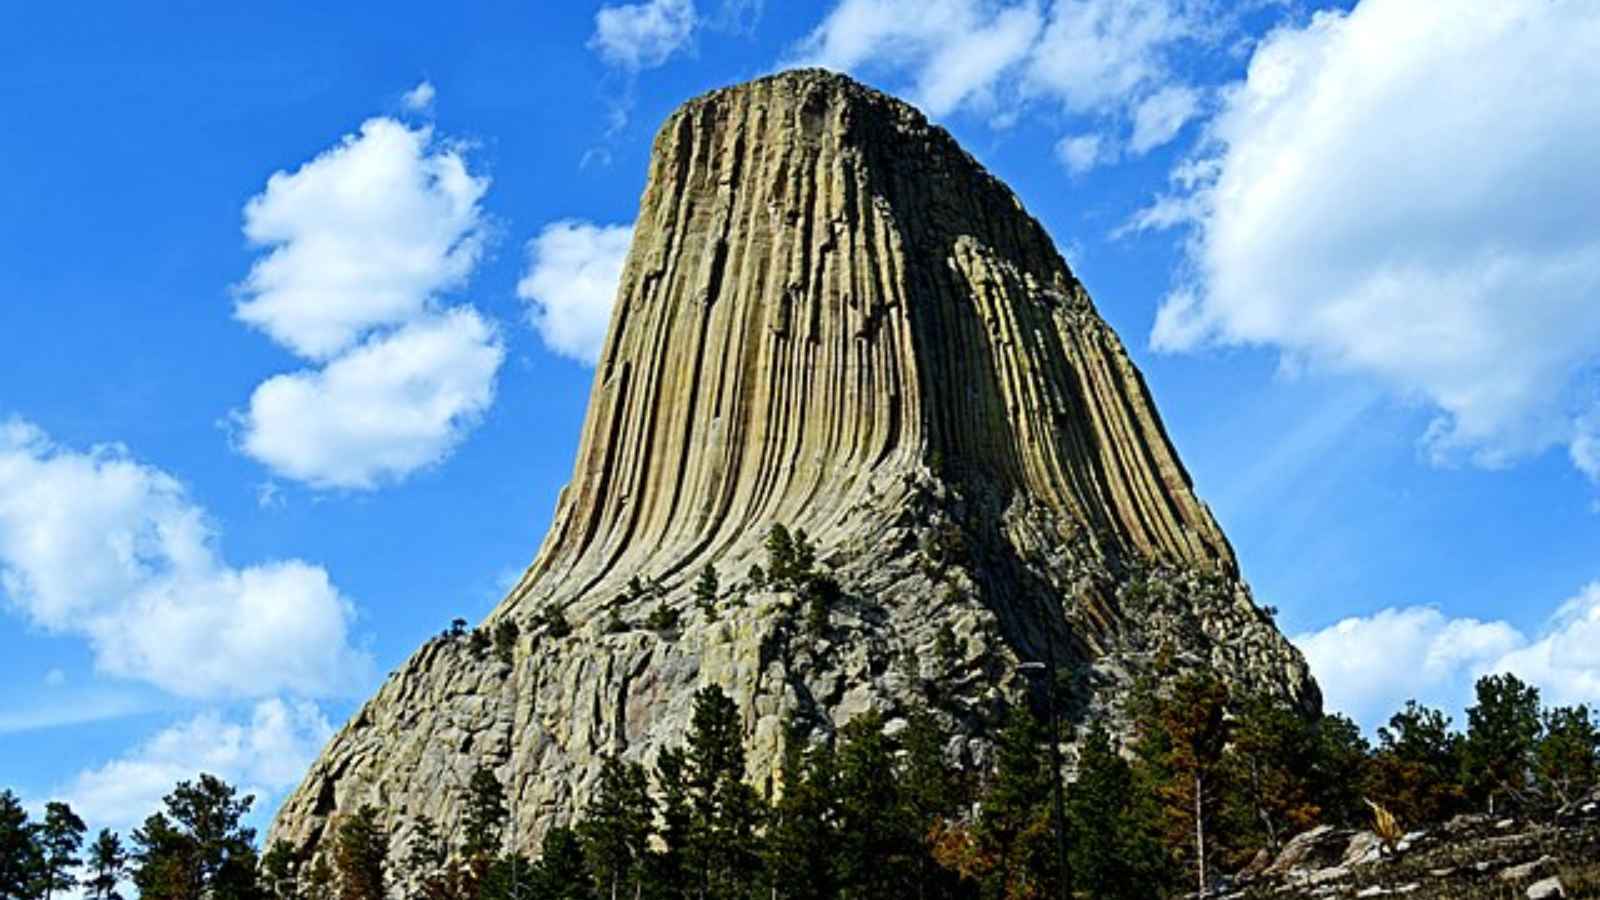 12 Natural Wonders Of The U.S. That Are Seriously Stunning